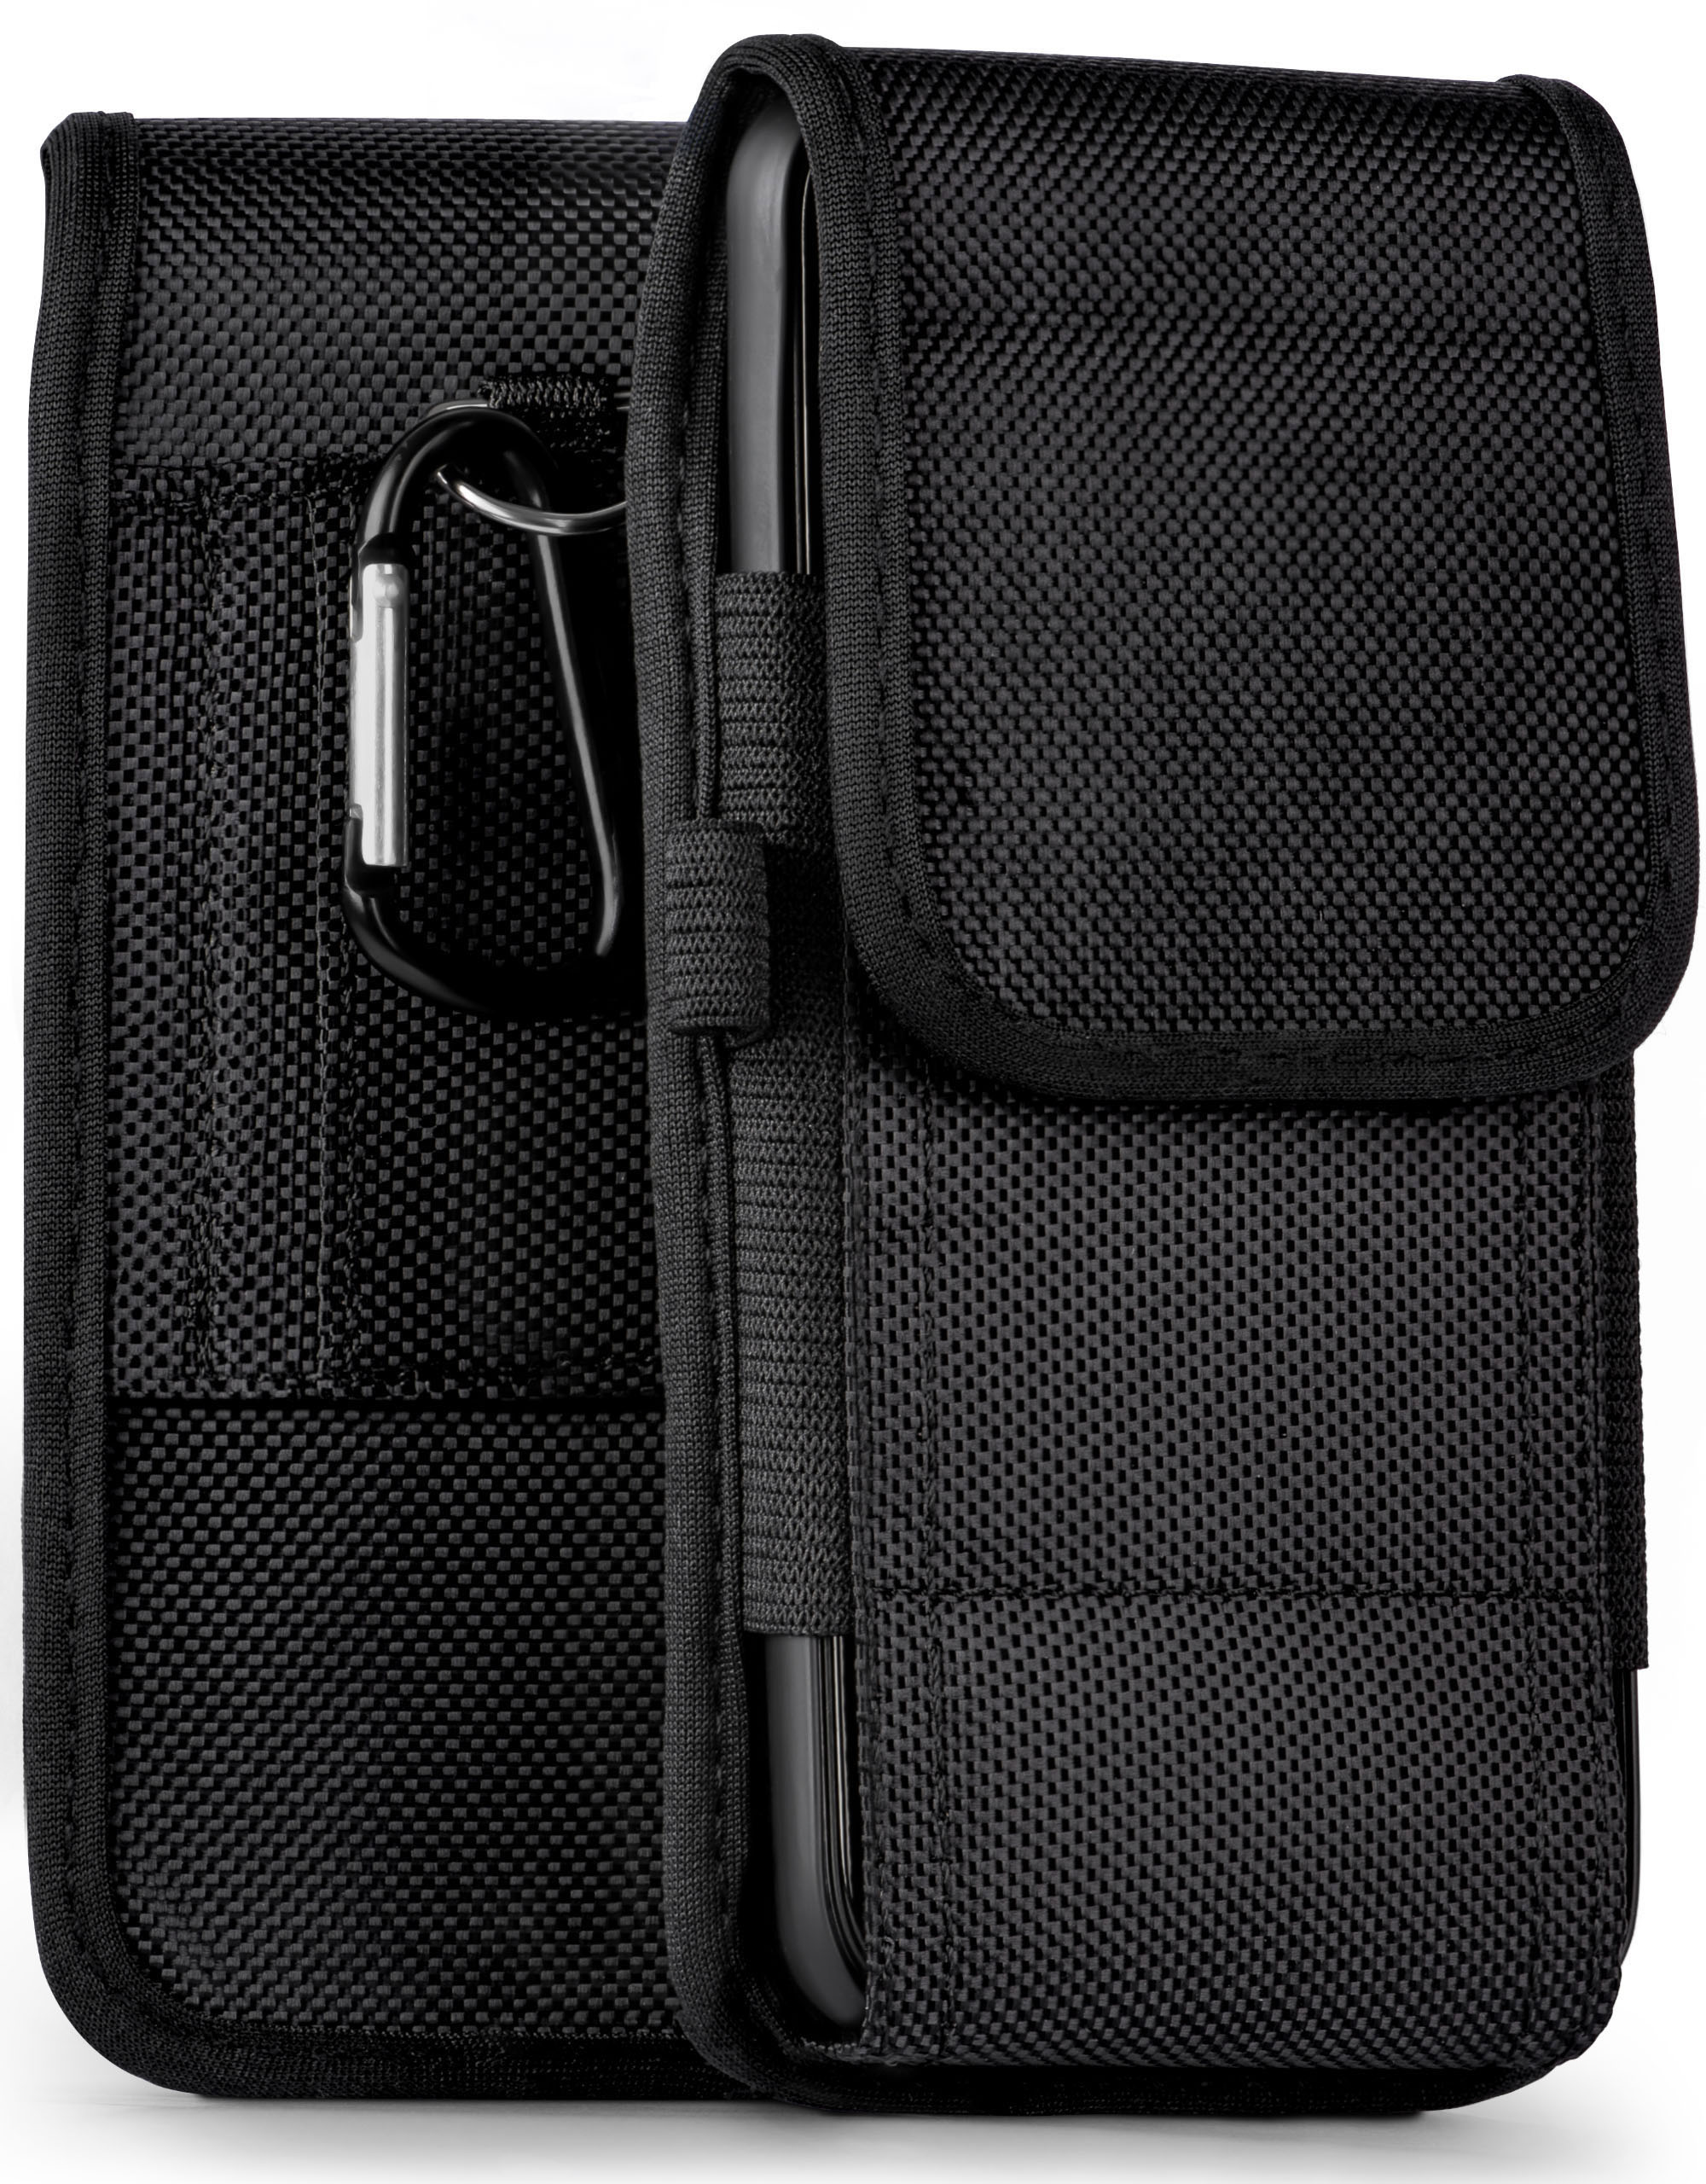 Case, Agility OnePlus, Holster, MOEX 5, Trail